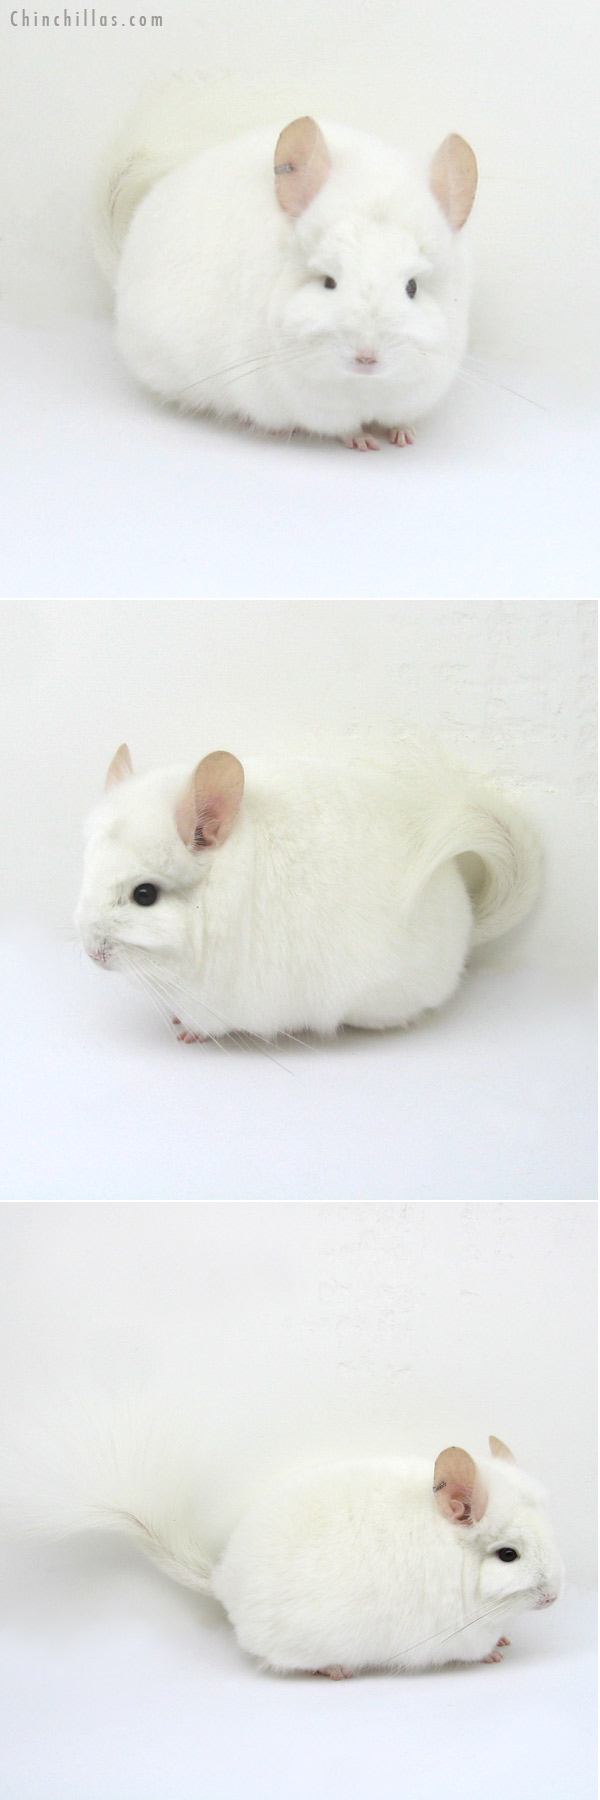 Chinchilla or related item offered for sale or export on Chinchillas.com - 12204 Rare Pink White Royal Persian Angora Female Chinchilla